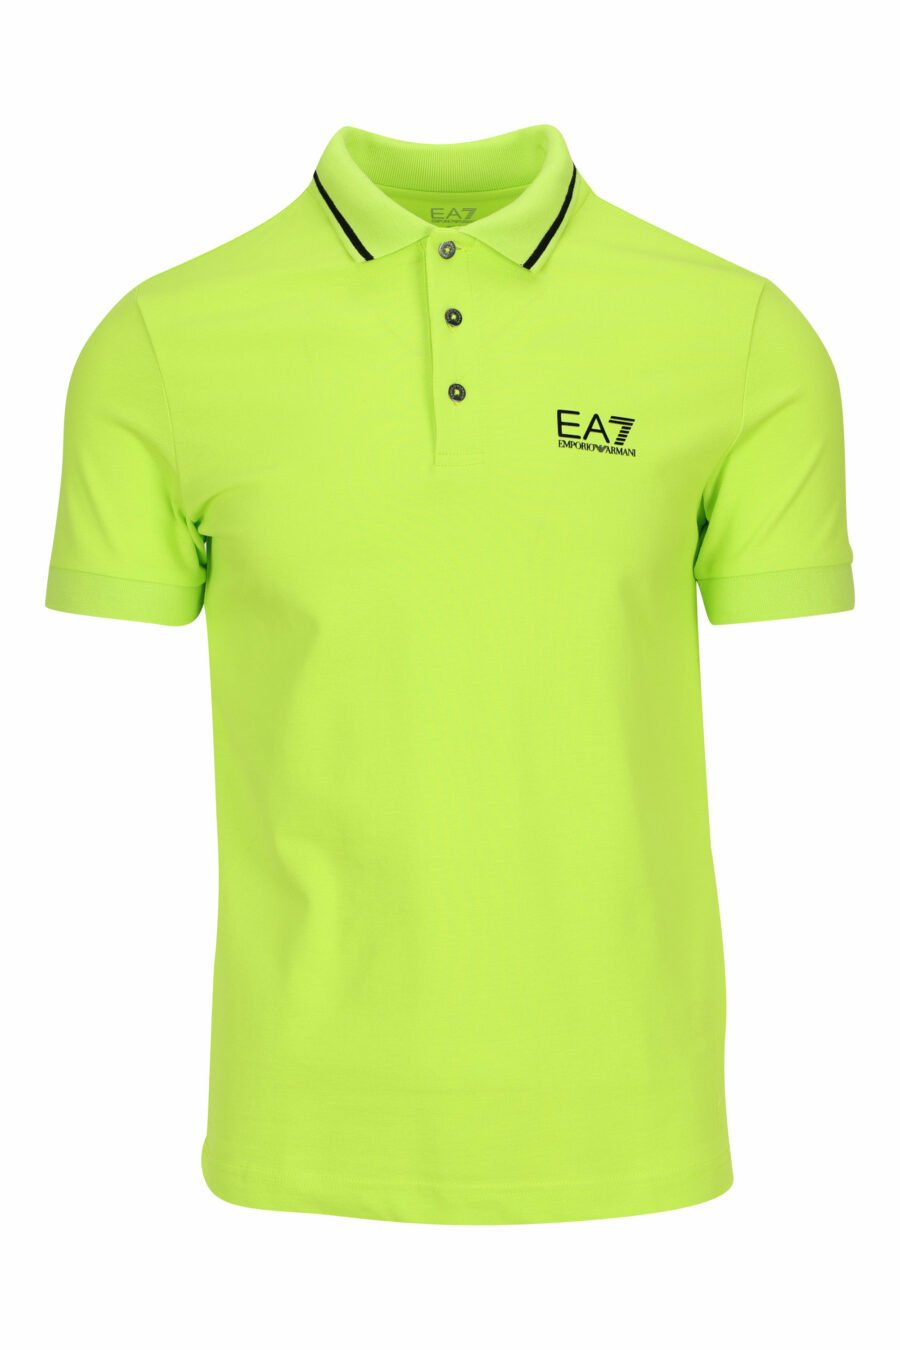 Lime green polo shirt with "lux identity" minilogue and white lines on collar - 8058947503650